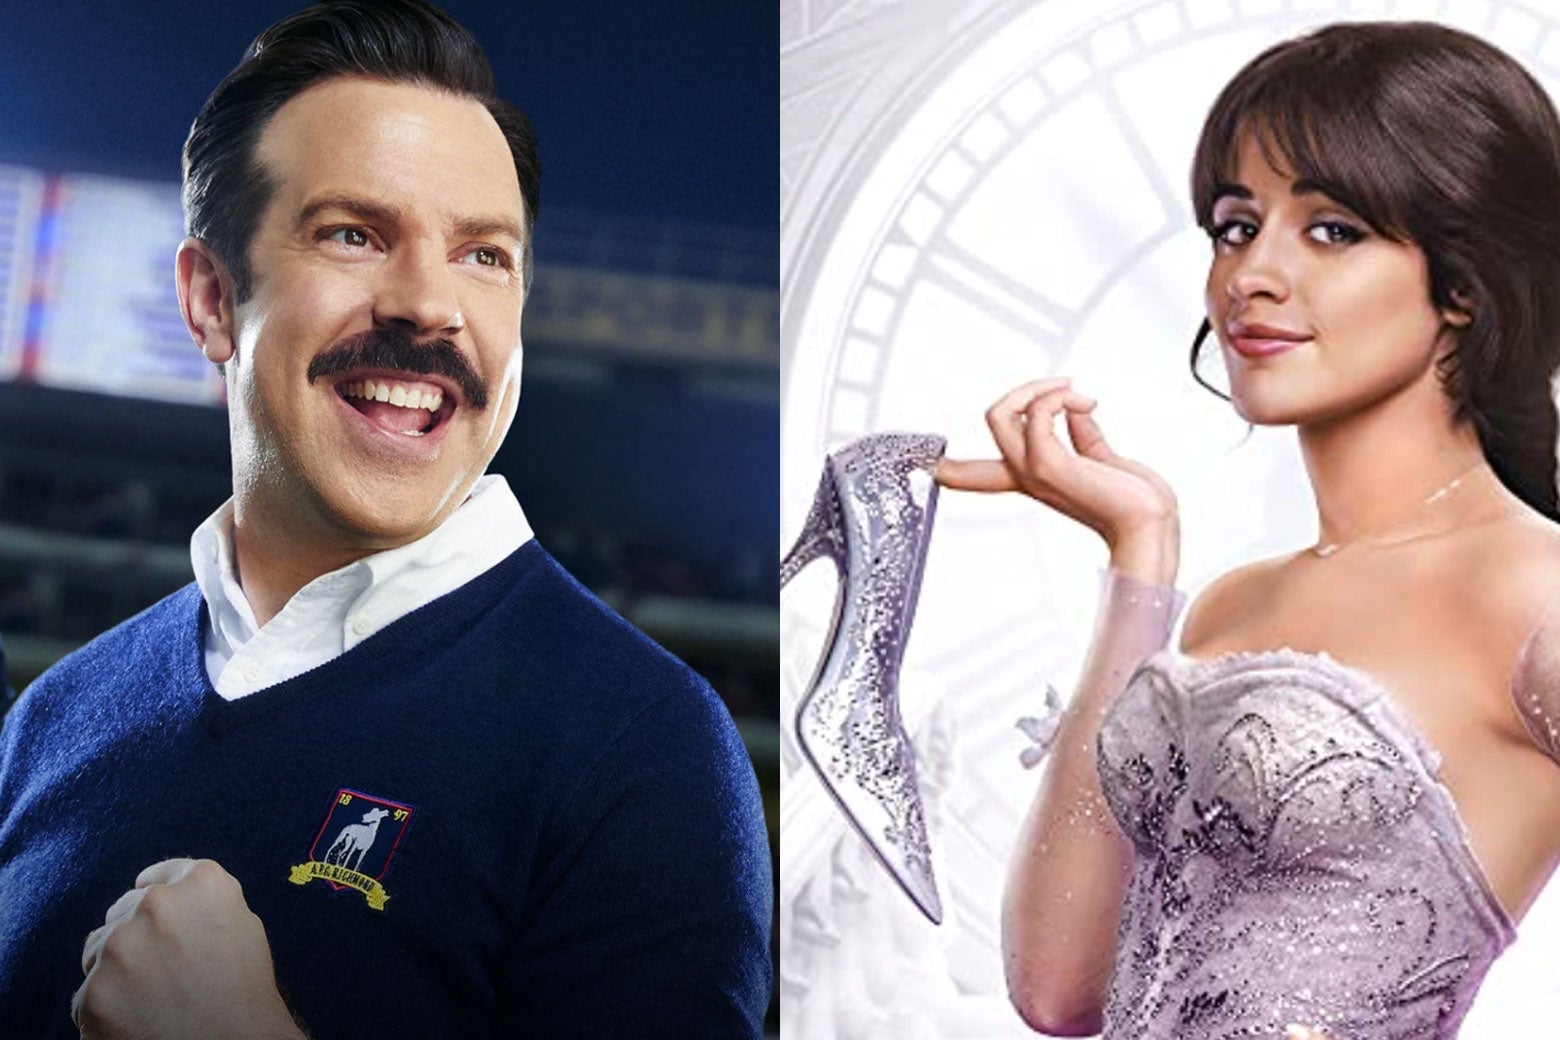 Ted Lasso and Cinderella